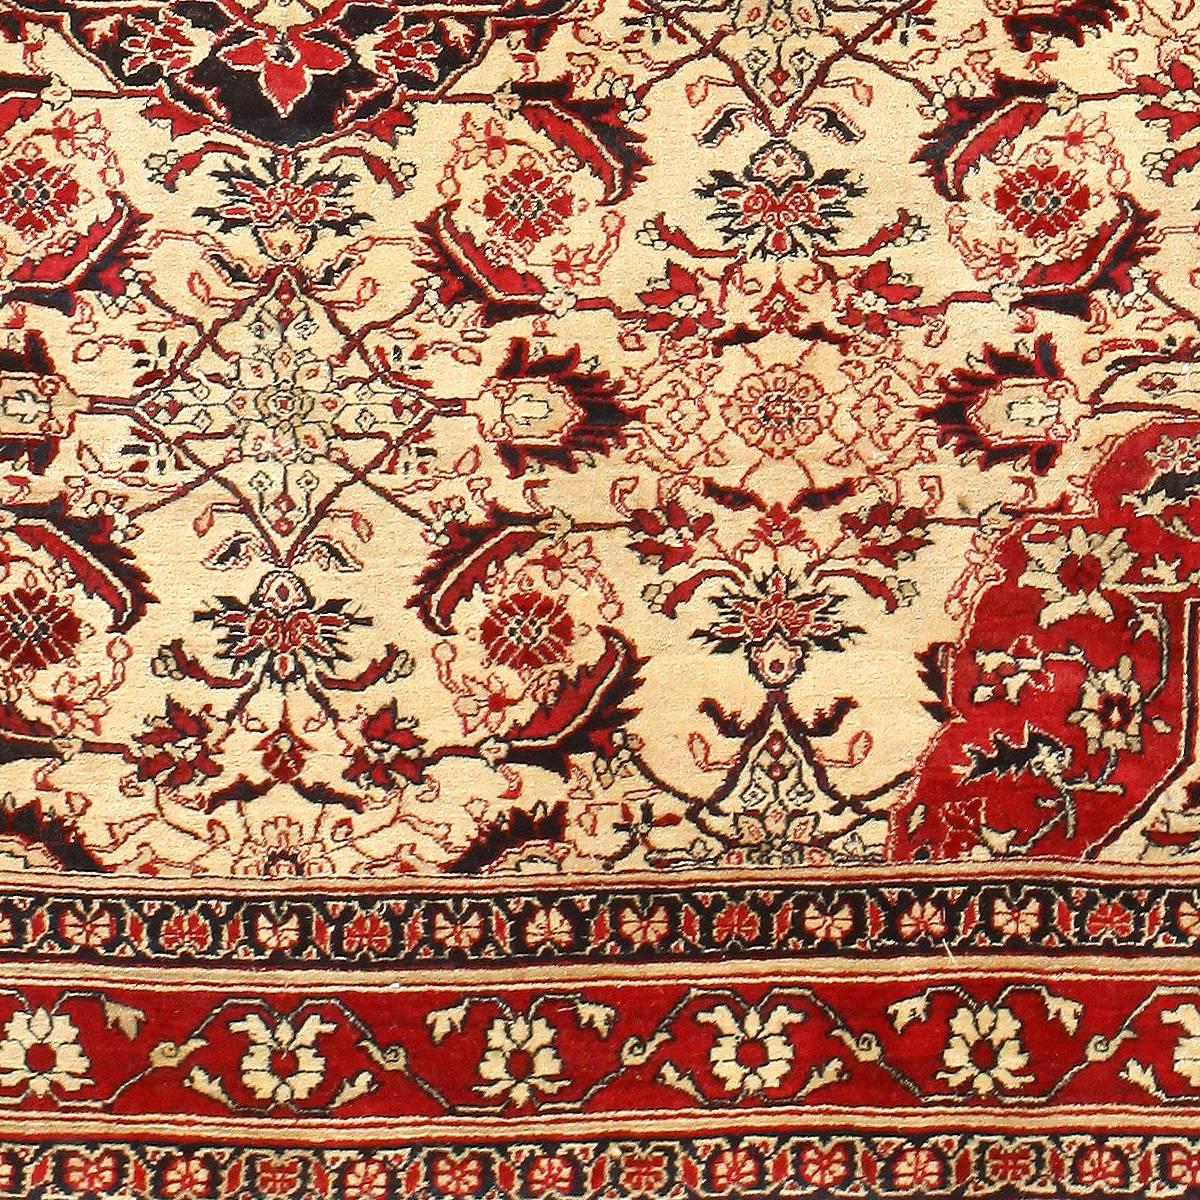 20th Century Fine Antique Indian Agra Rug. Size: 6 ft x 8 ft 9 in (1.83 m x 2.67 m)